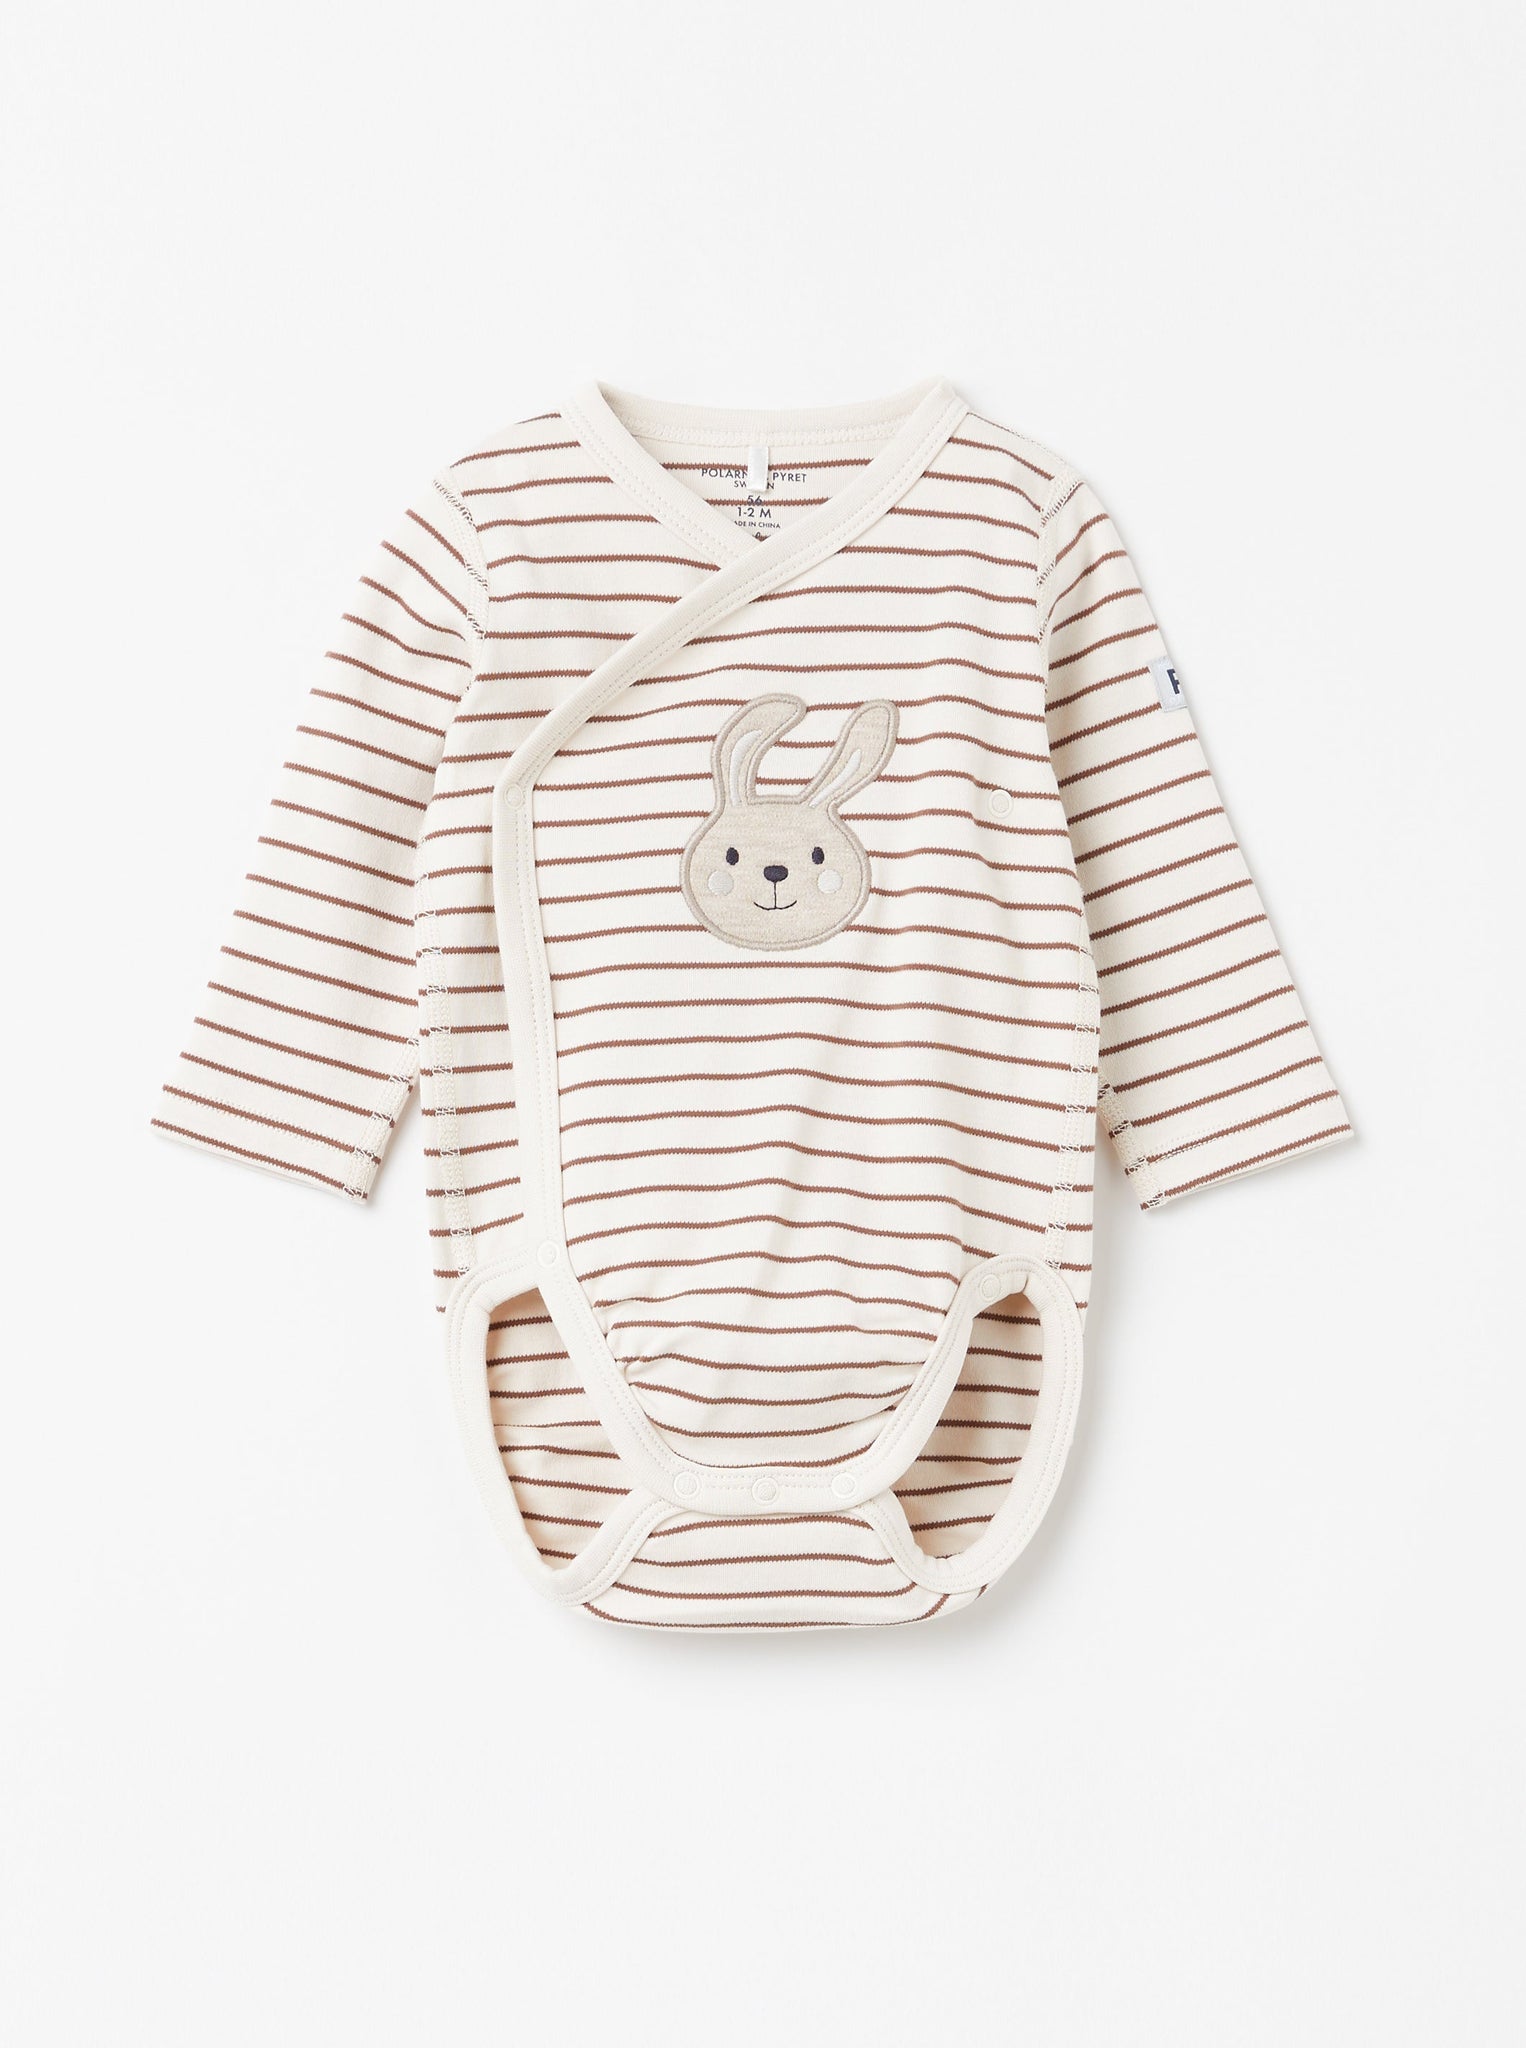 Bunny Print Wraparound Beige Babygrow from the Polarn O. Pyret Kidswear collection. Nordic kids clothes made from sustainable sources.